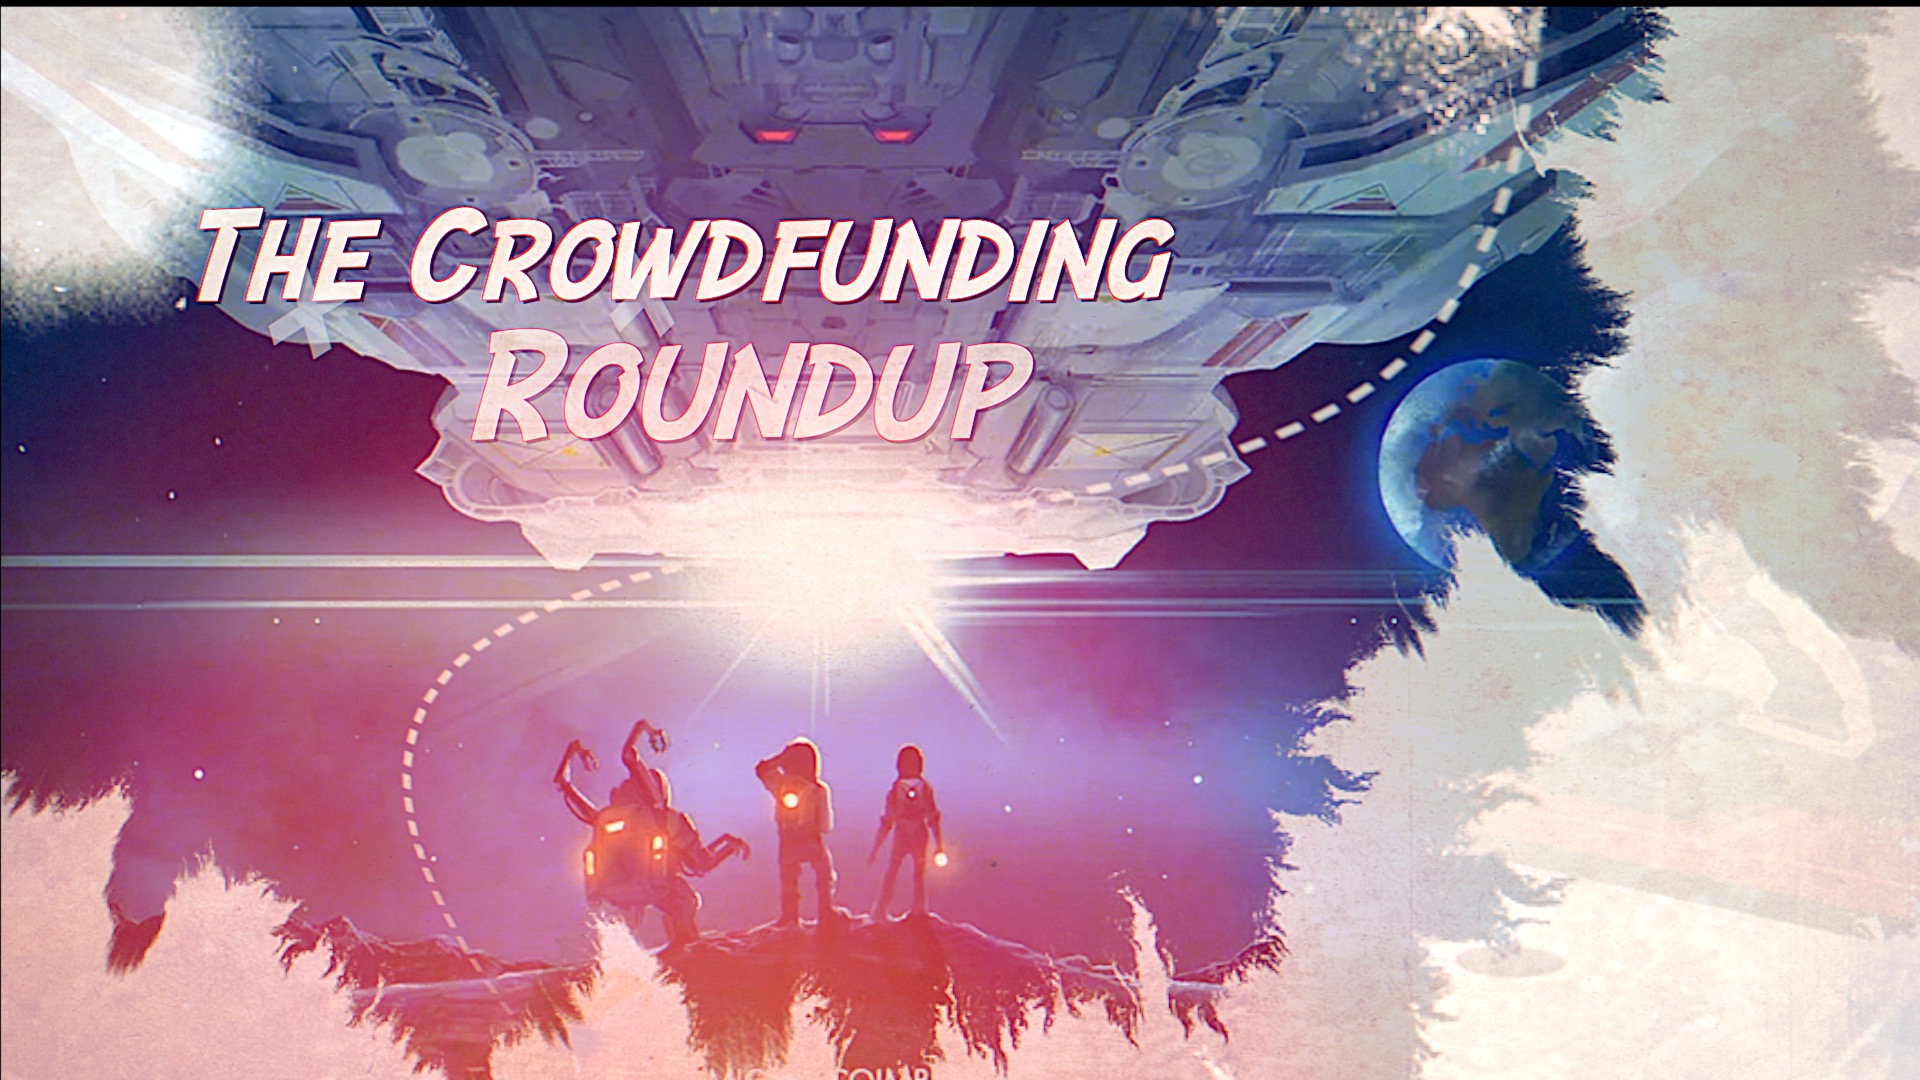 The Crowdfunding Roundup for Tuesday, March 7th